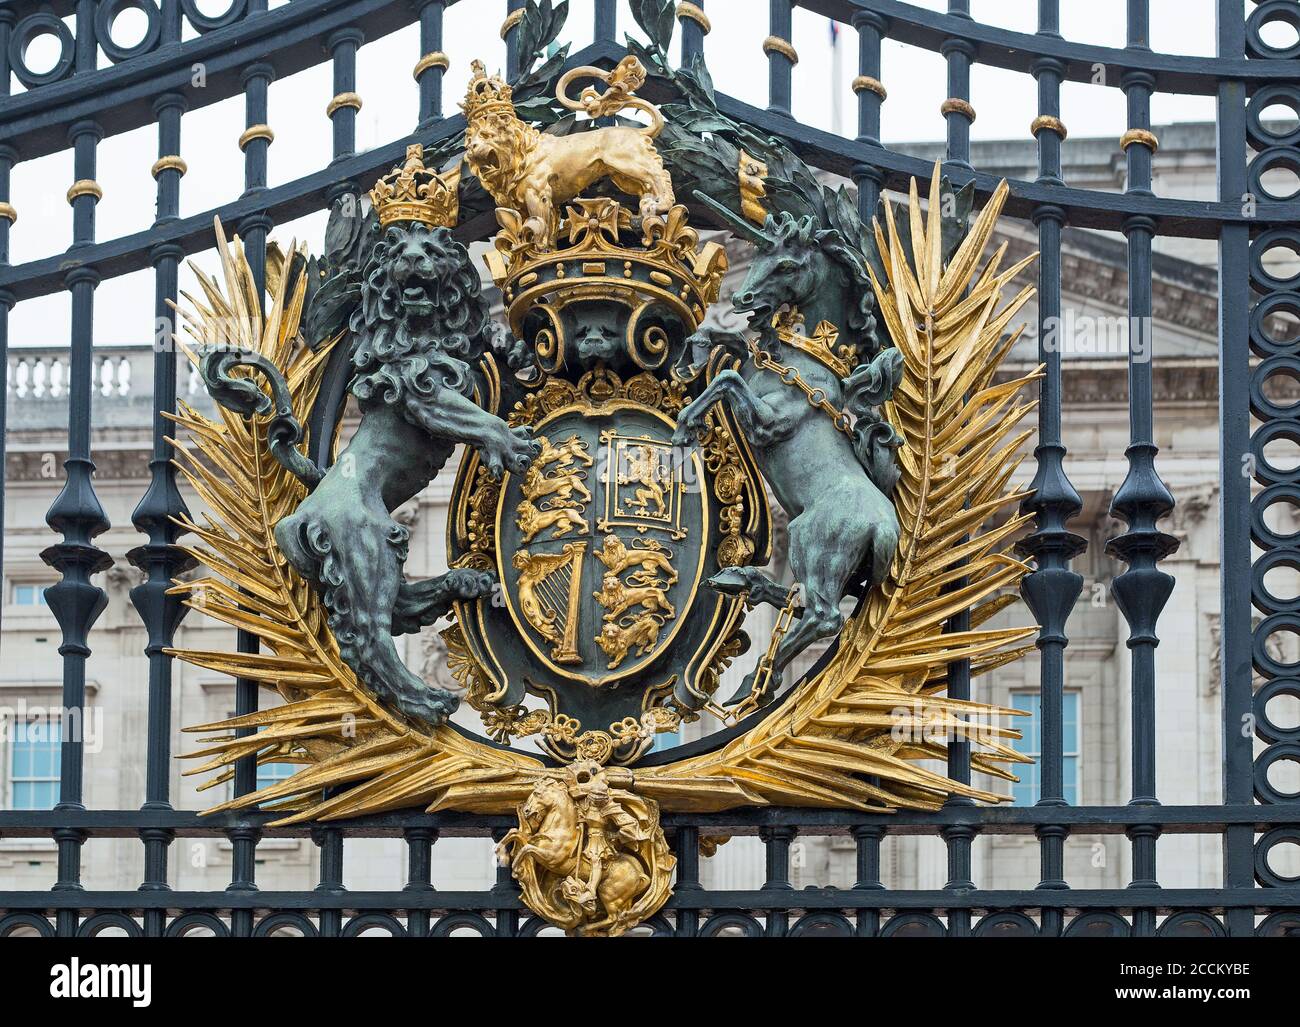 Royal Crest, Buckingham Palace, Londn, 2020.  The gate bearing the Royal Coat of Arms is the main entrance to the Queen's London residence. The lion o Stock Photo